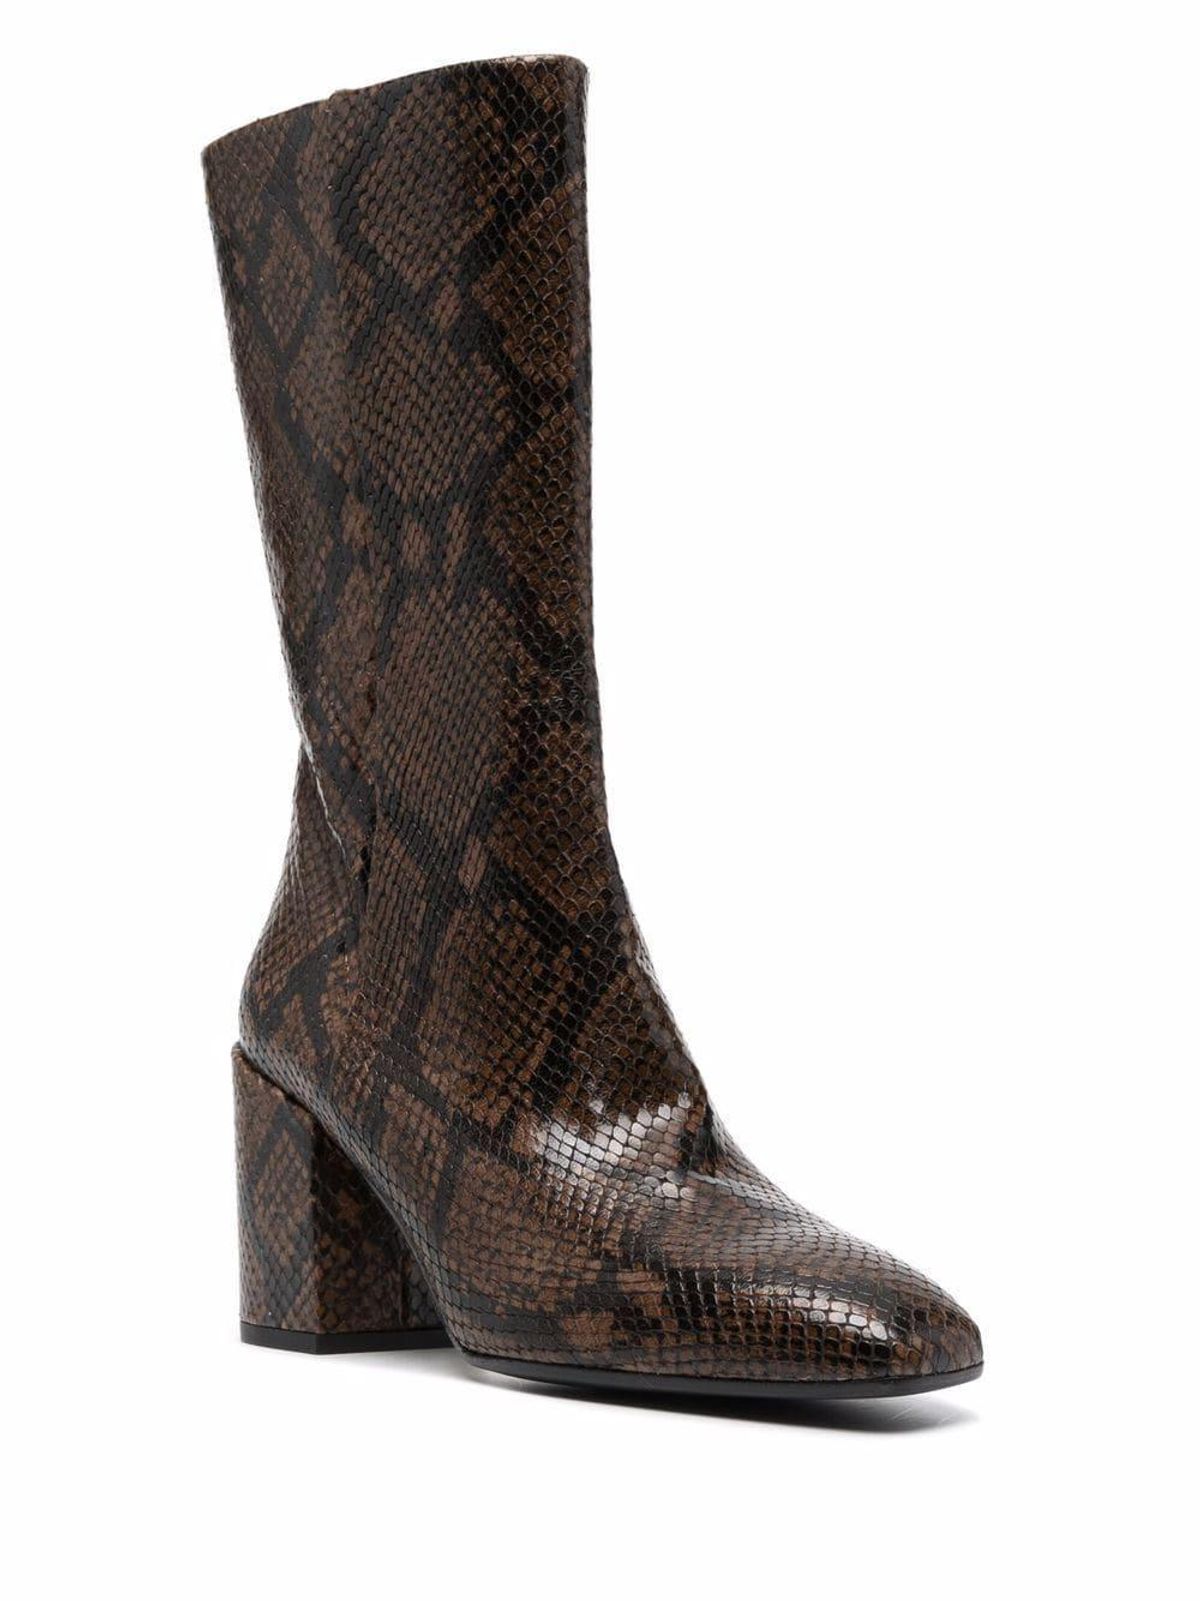 aeyde snakeskin effect ankle boots